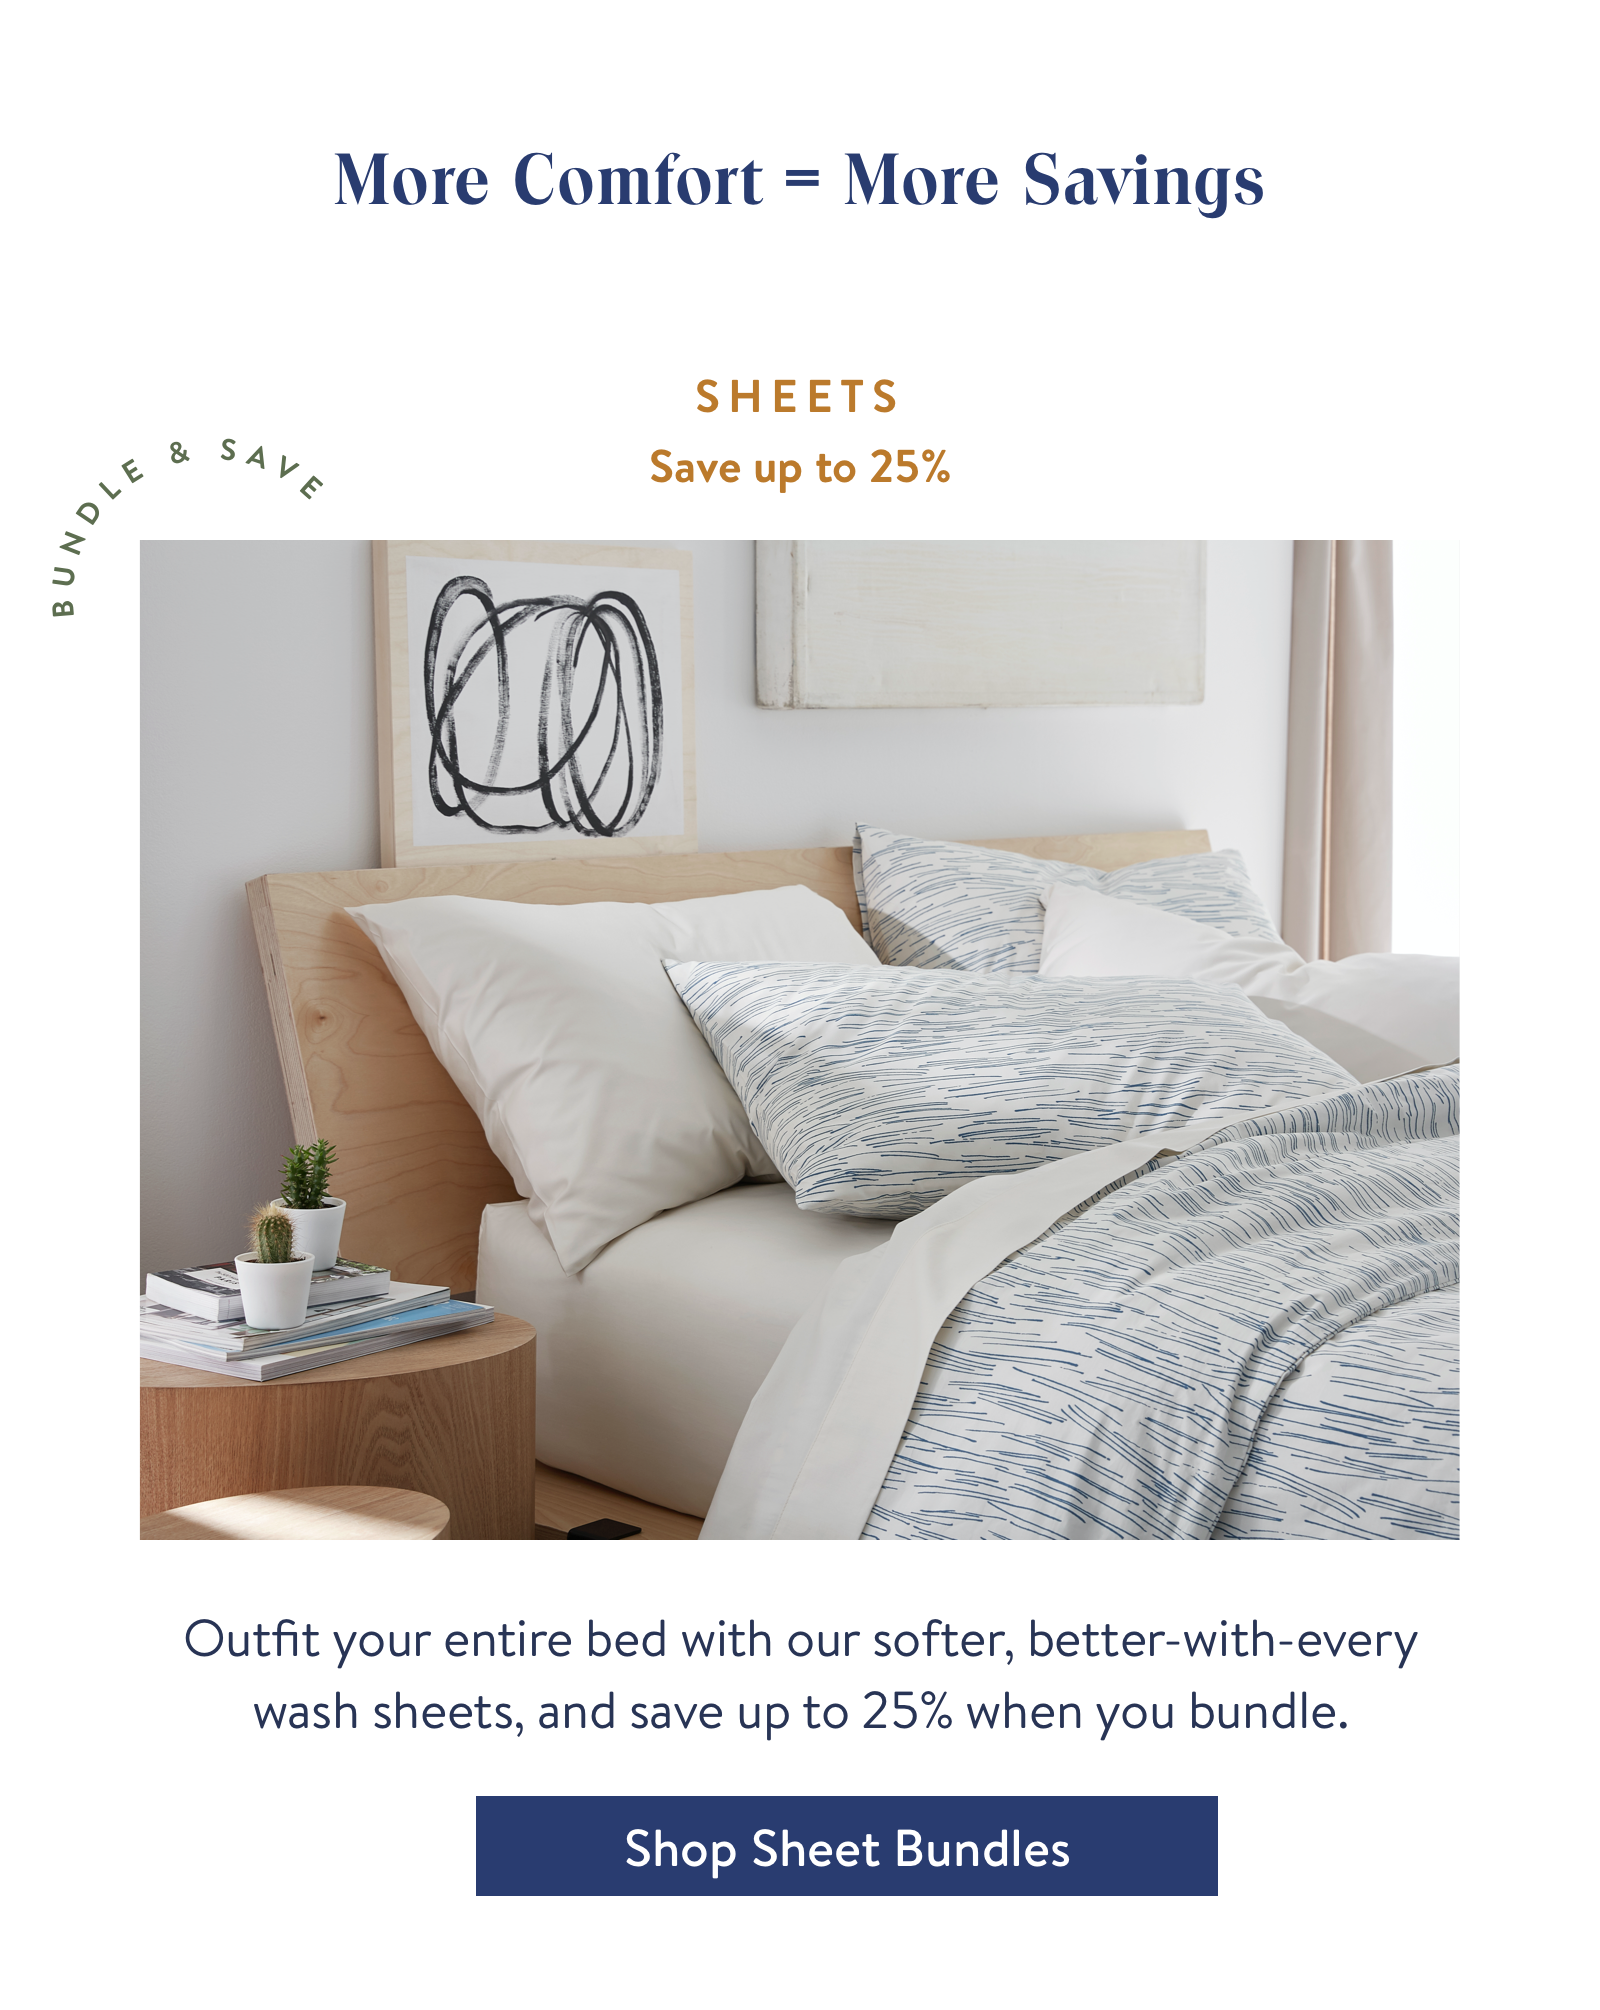 Sheets - Outfit your entire bed with our softer, better-with-every wash sheets, and save up to 25% when you bundle.